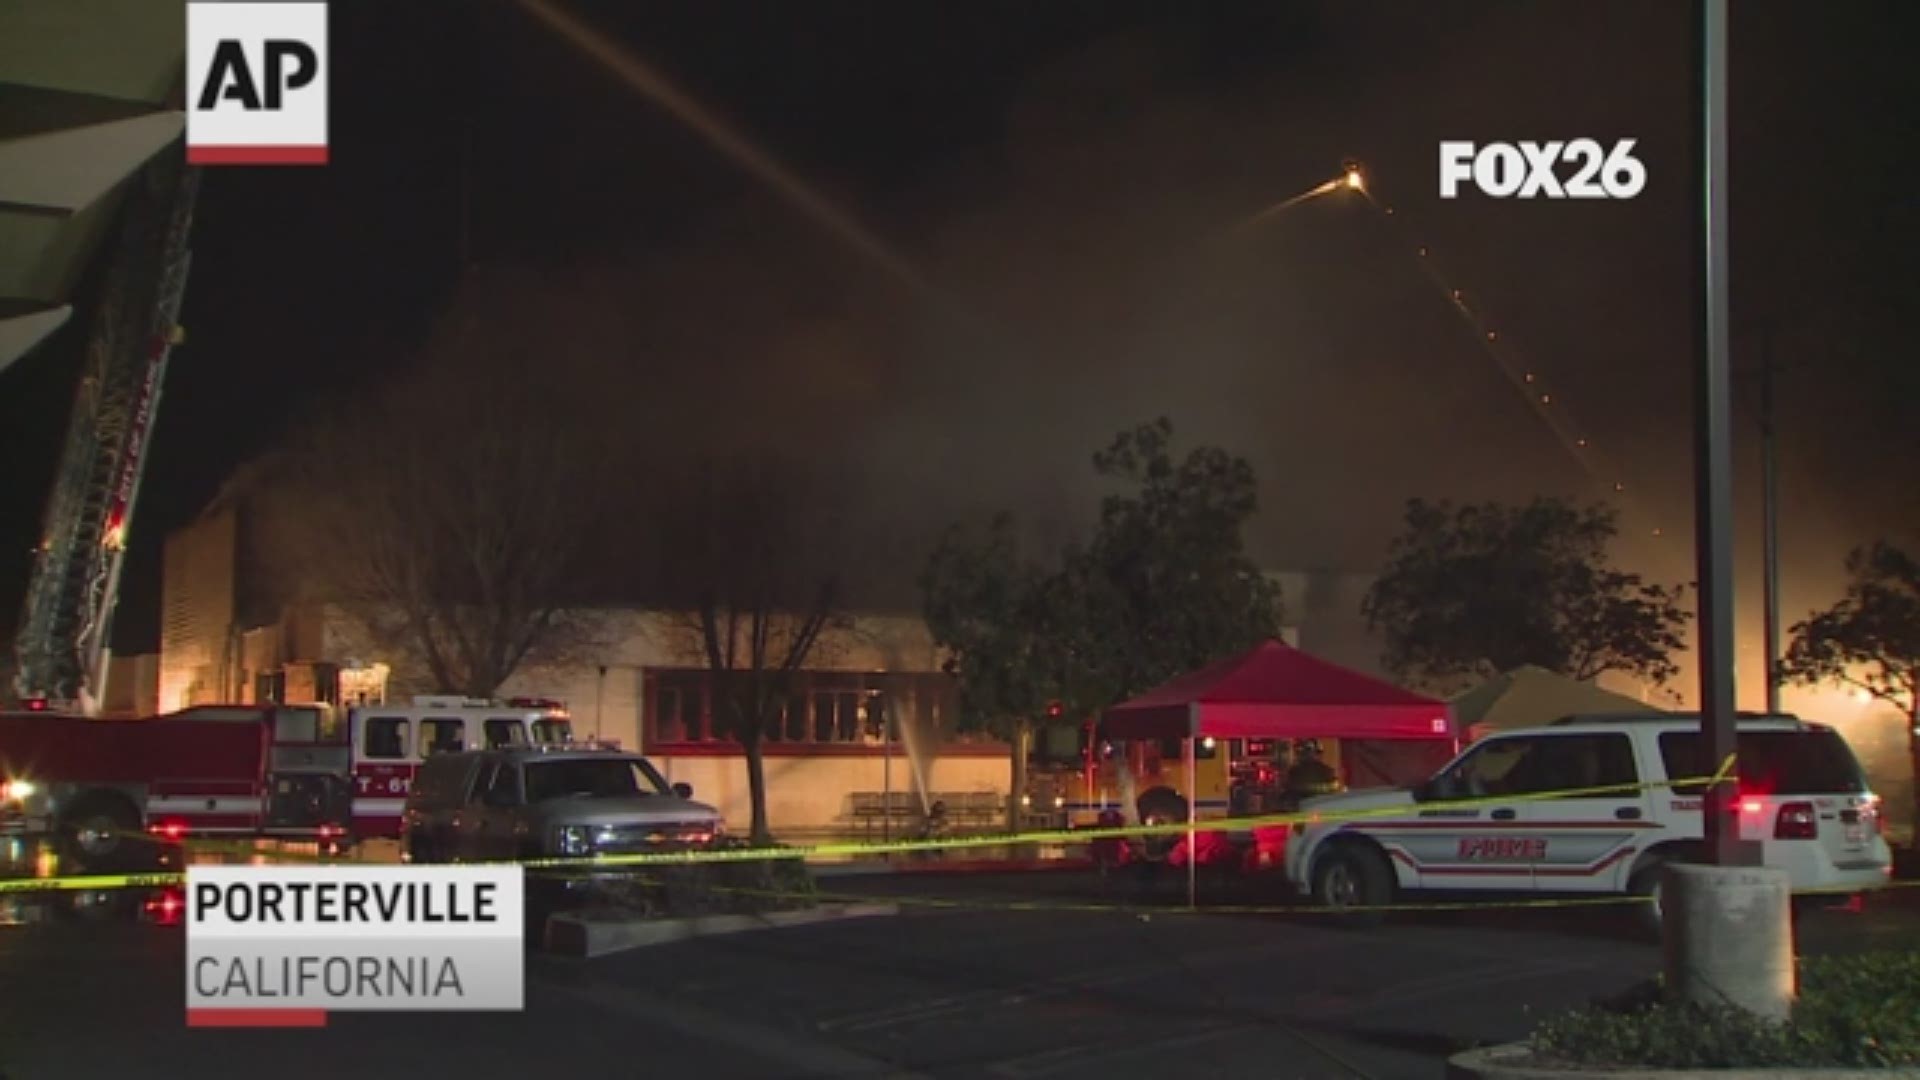 Two Porterville firefighters died Tuesday night as crews struggled to put out a massive fire at the Porterville library, according to police.